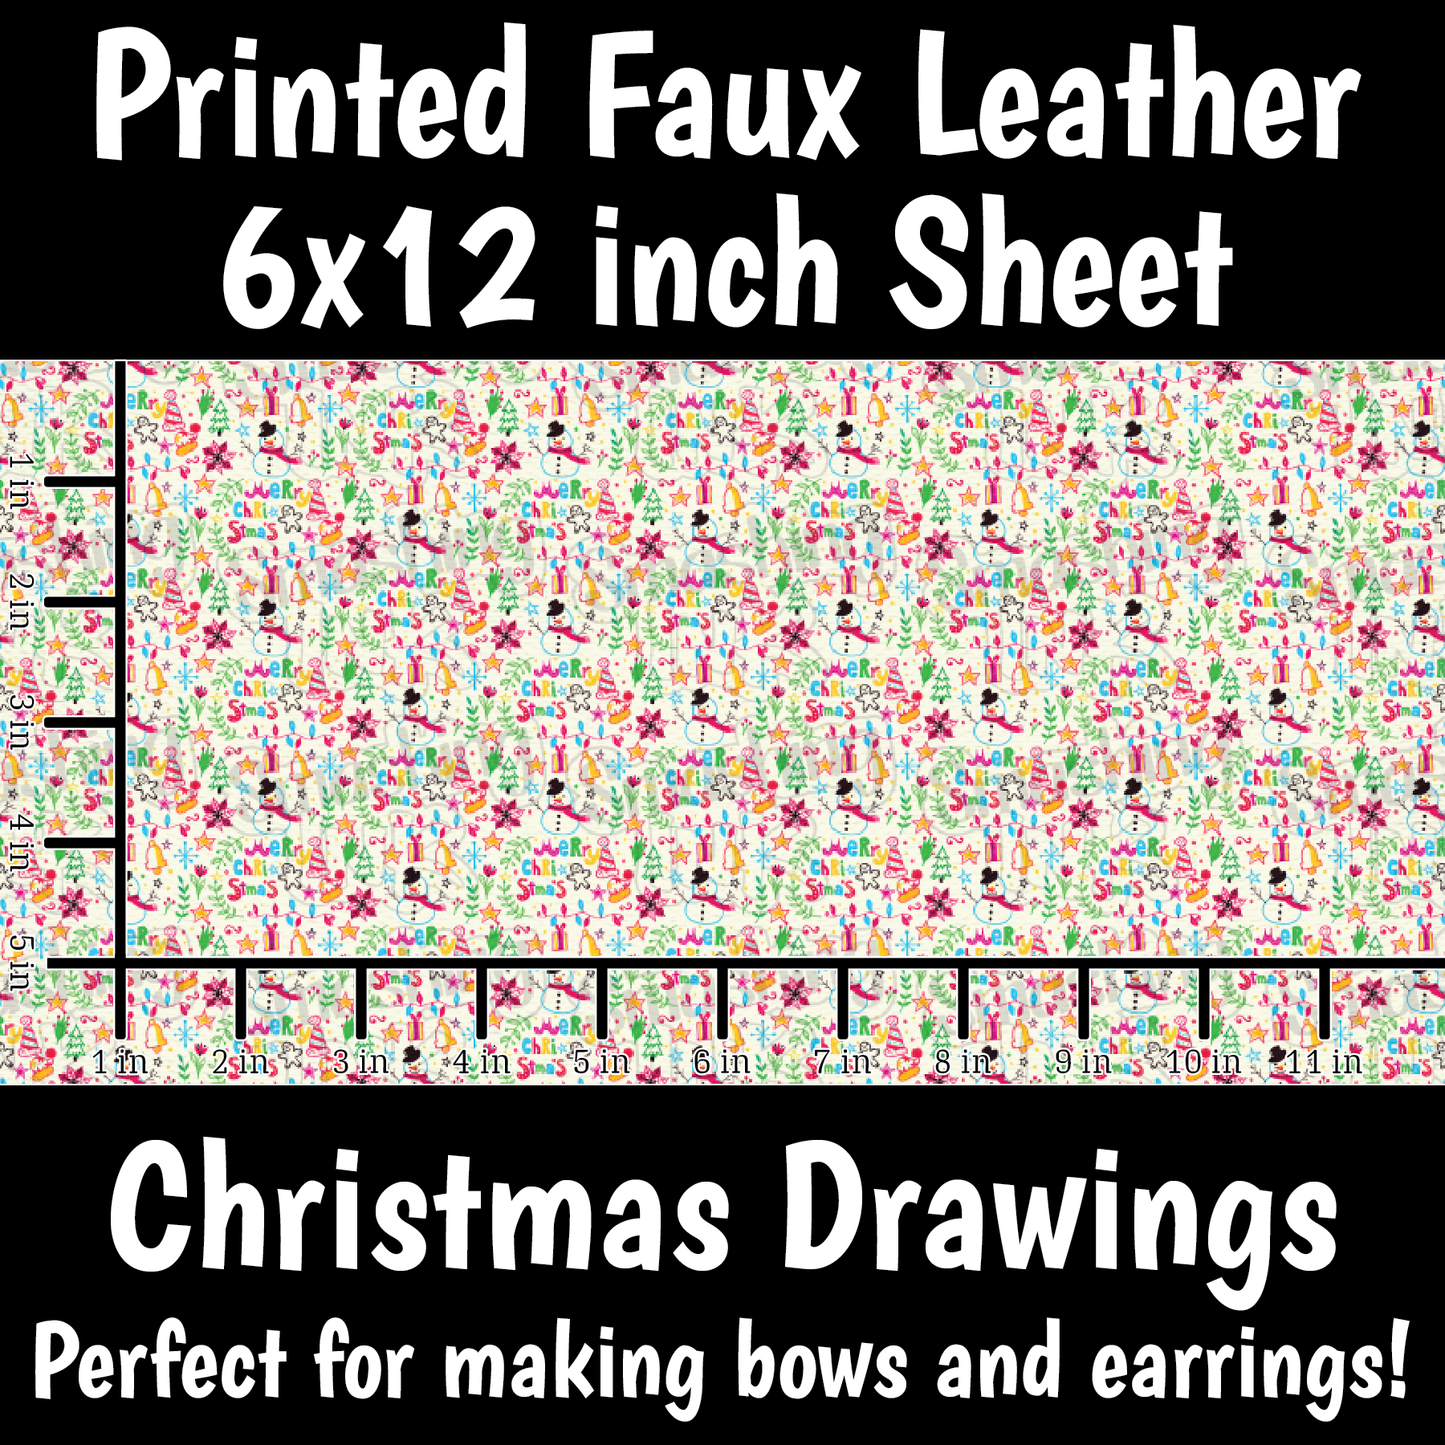 Christmas Drawings - Faux Leather Sheet (SHIPS IN 3 BUS DAYS)